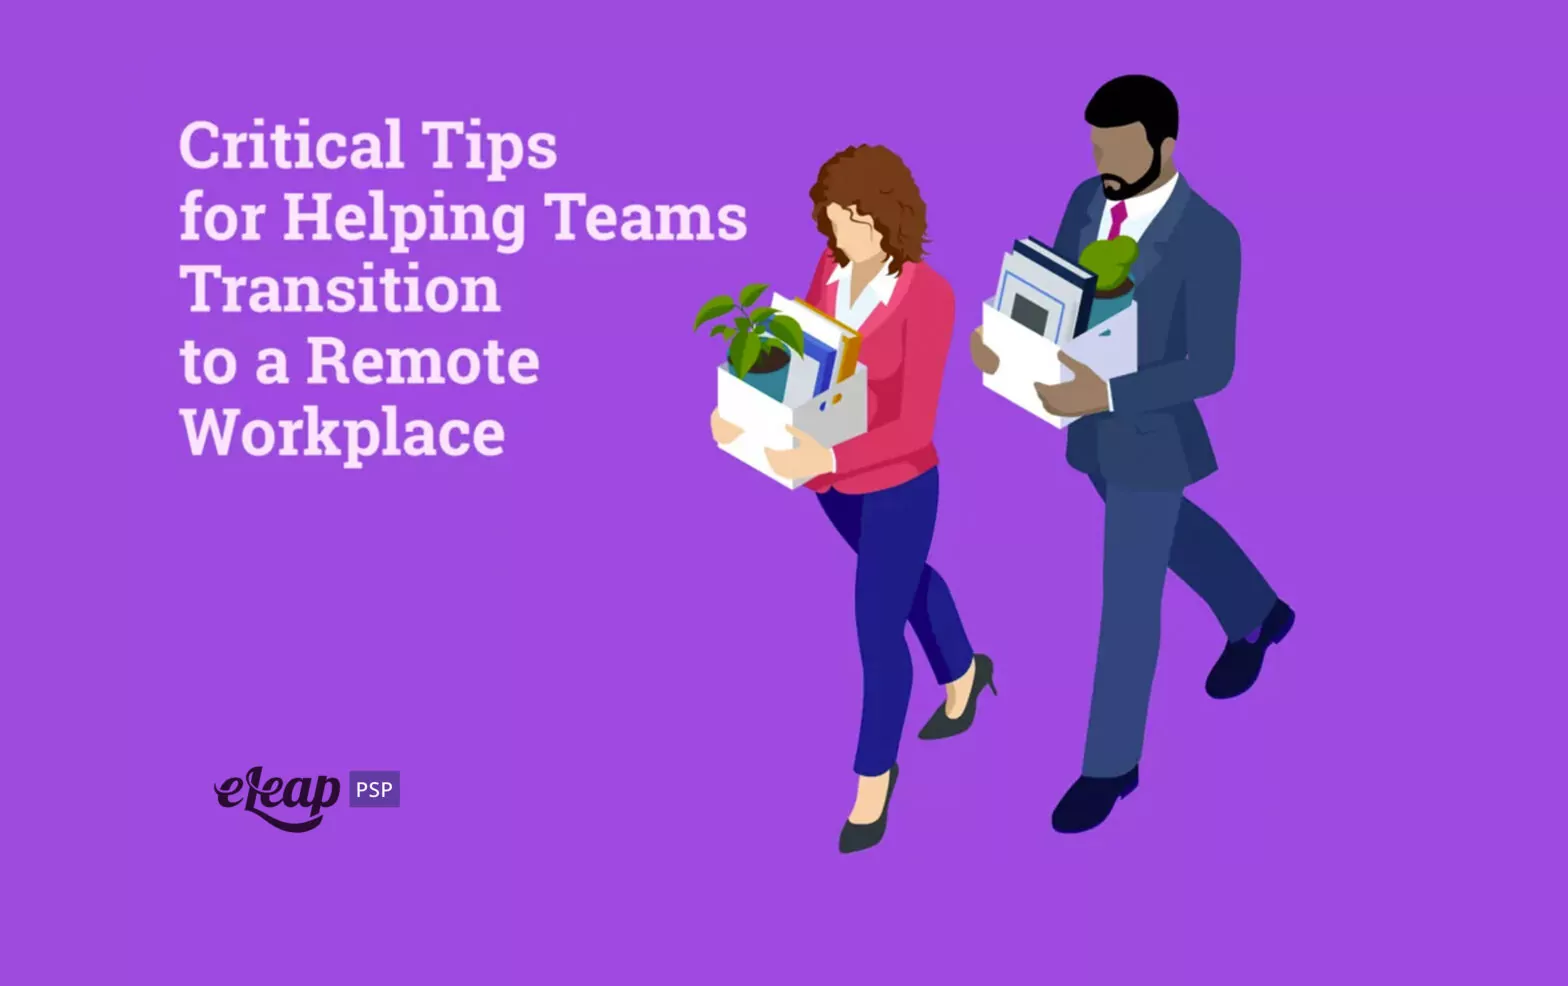 Critical Tips for Helping Teams Transition to a Remote Workplace